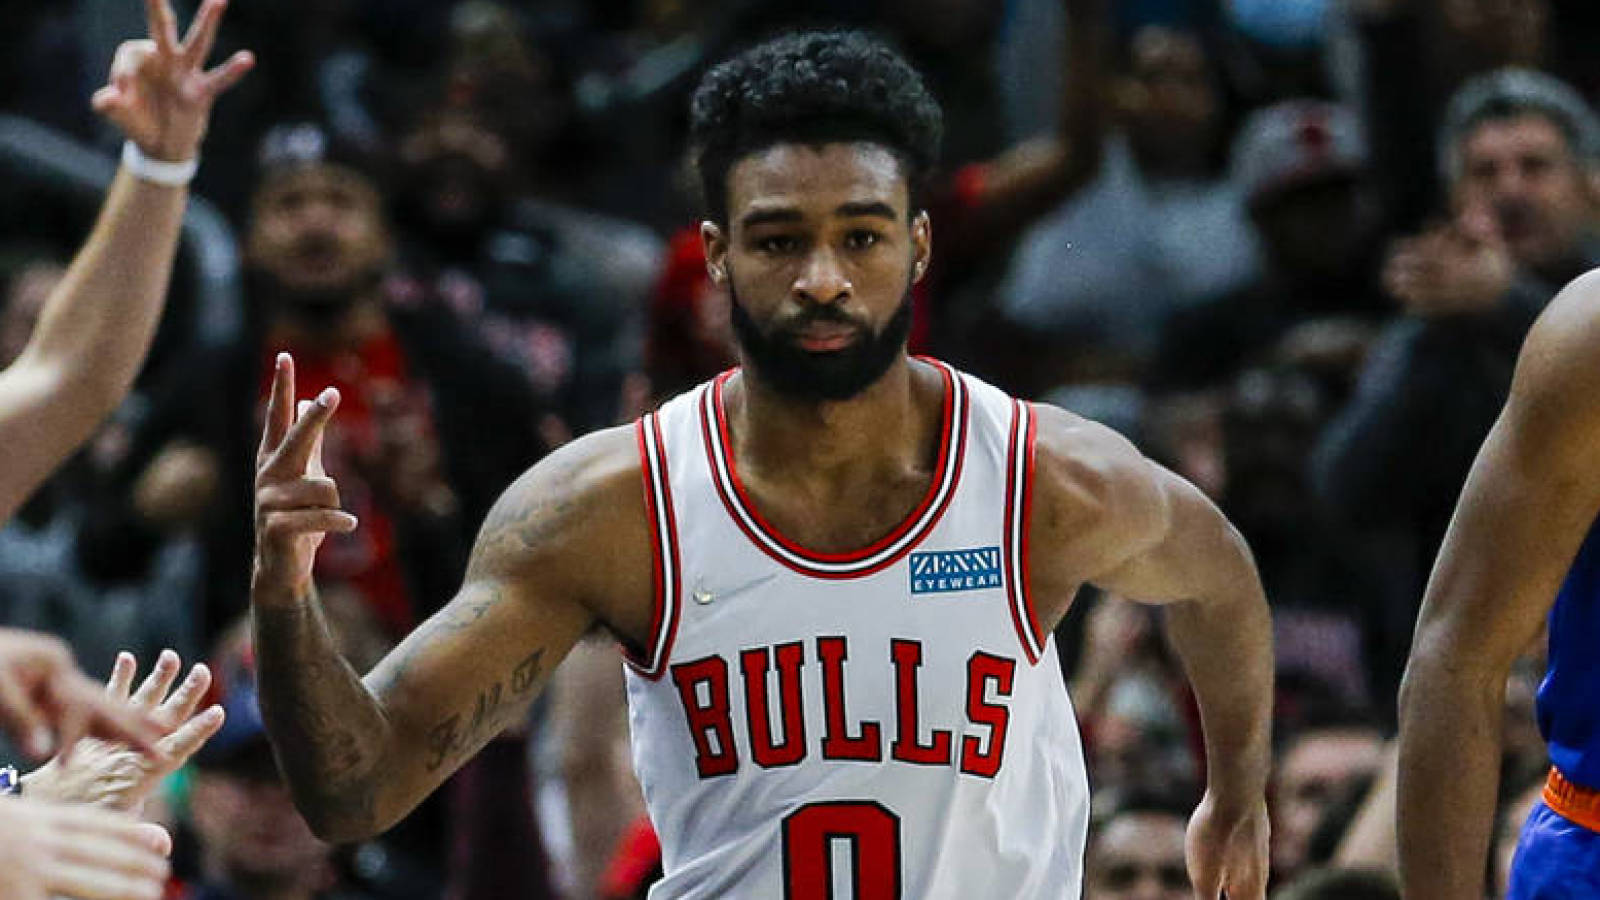 Bulls guard Coby White tests positive for COVID-19